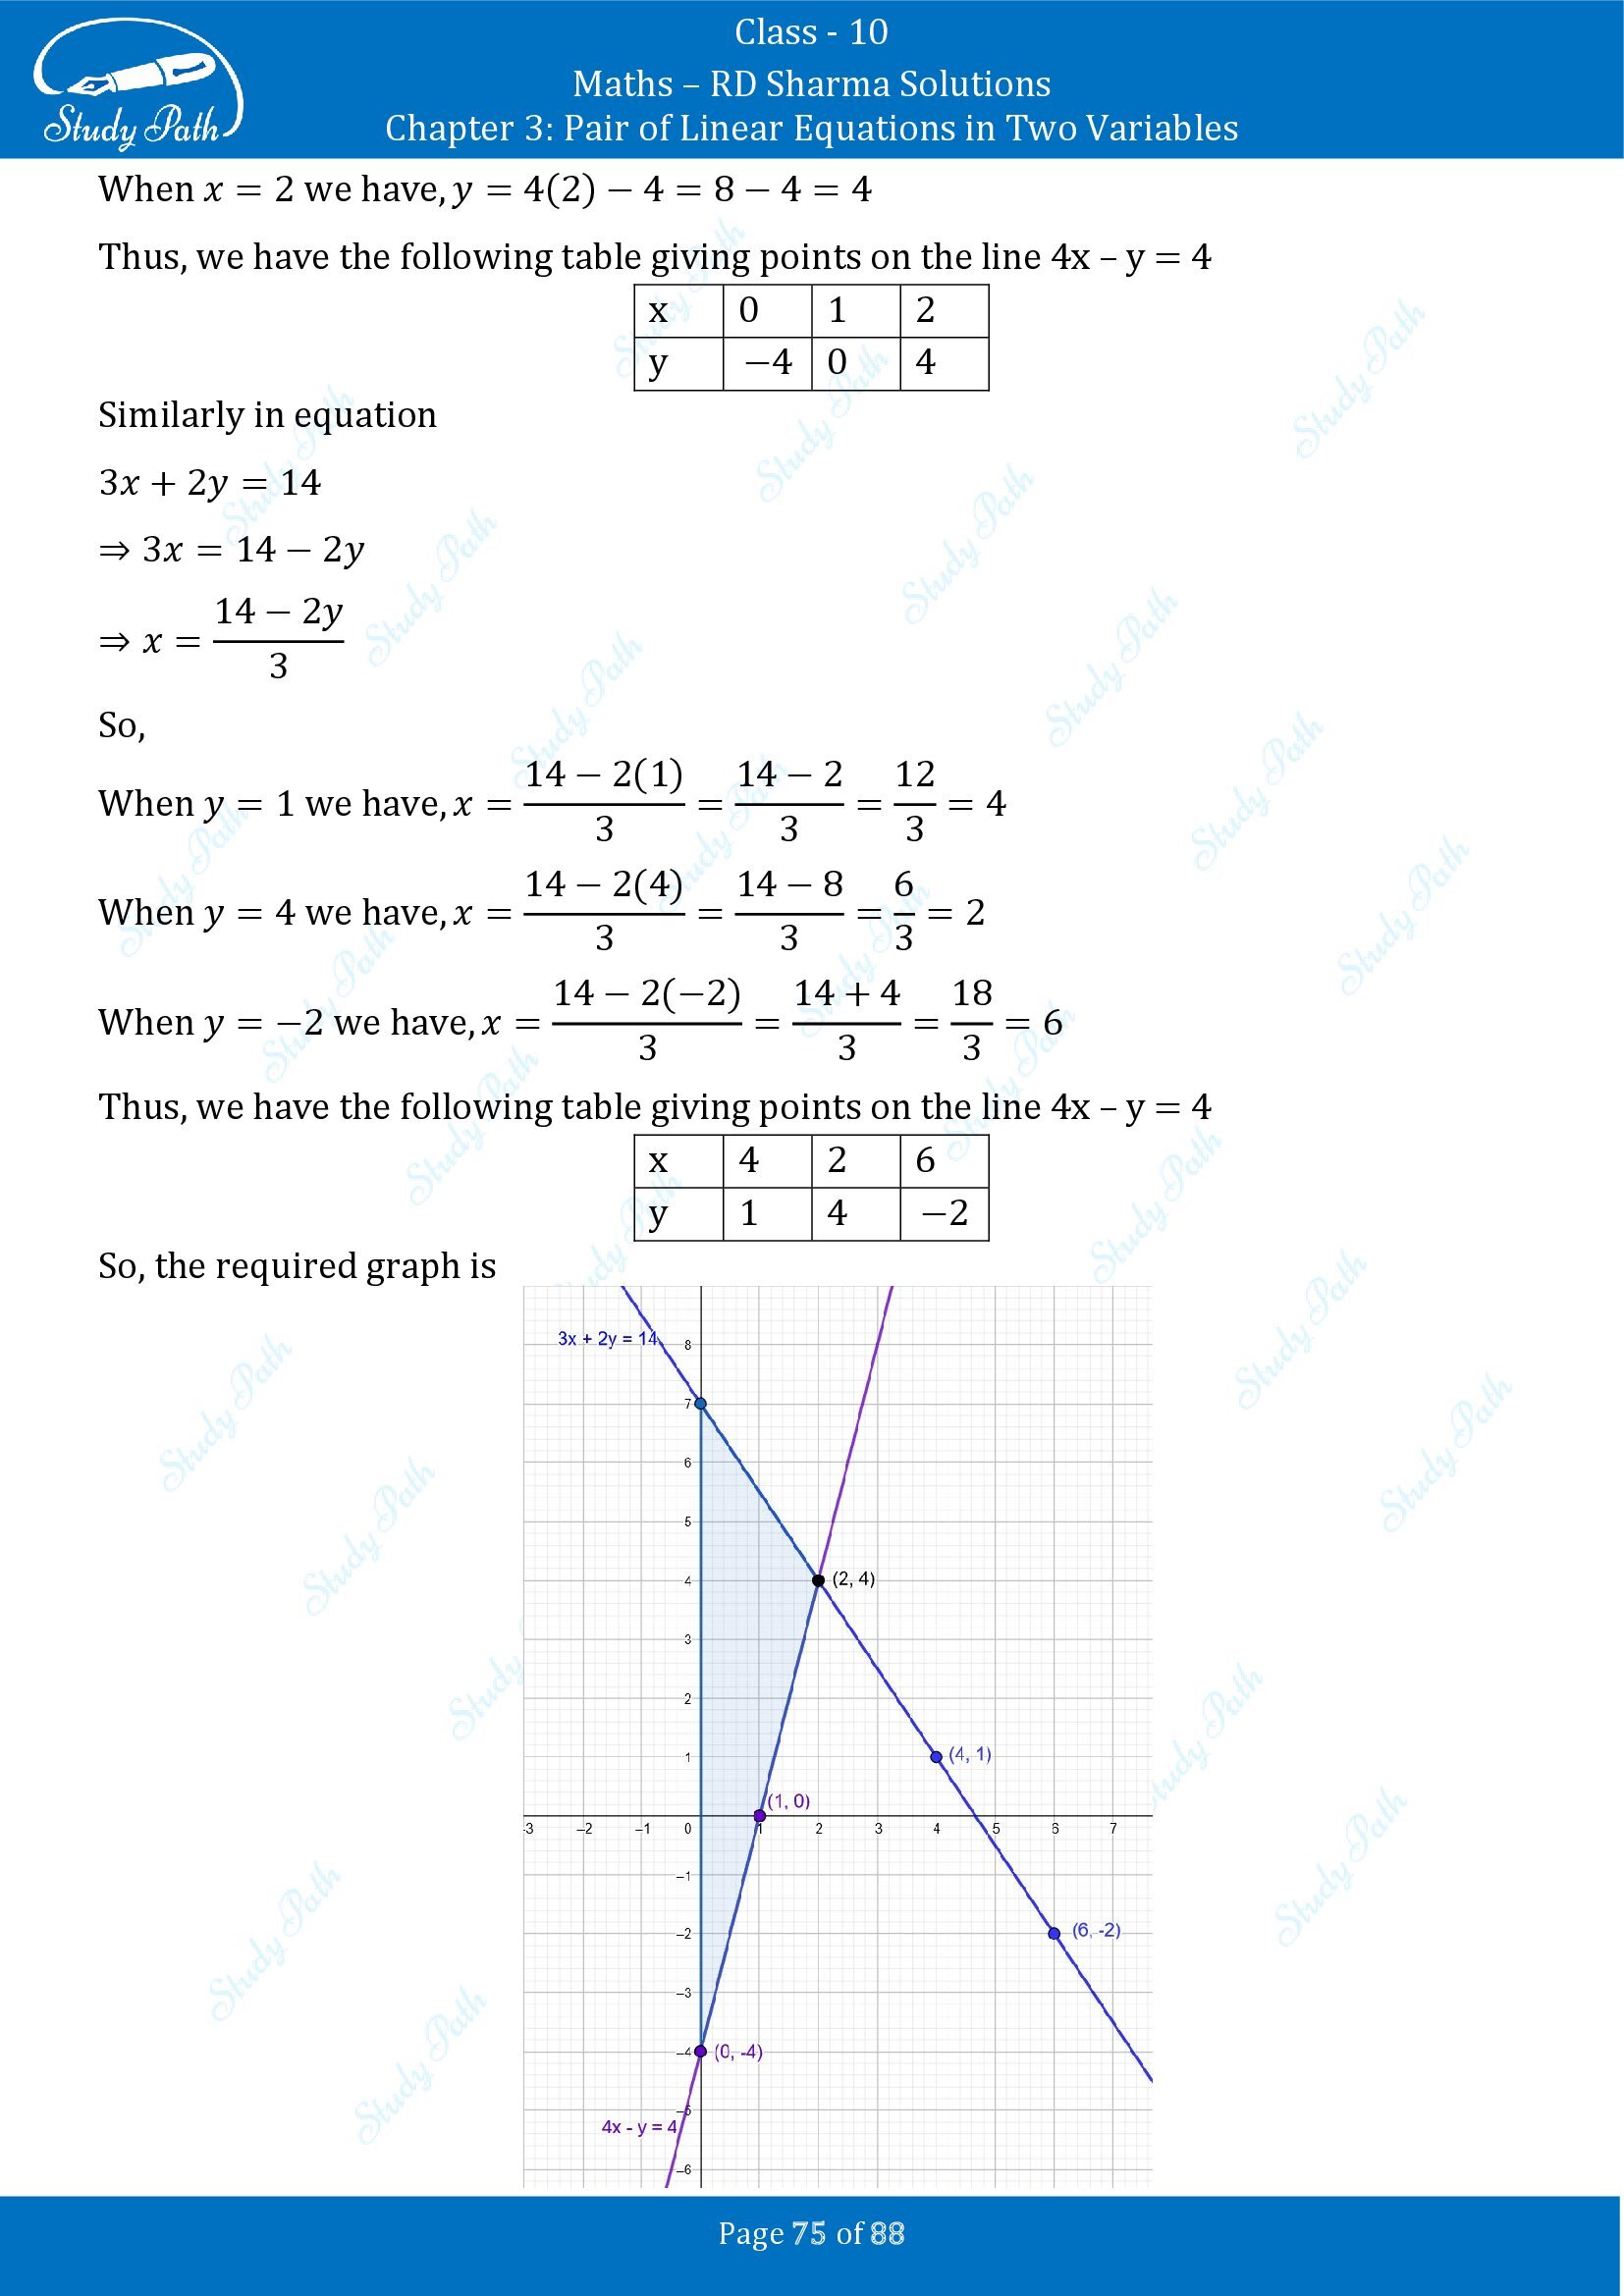 RD Sharma Solutions Class 10 Chapter 3 Pair of Linear Equations in Two Variables Exercise 3.2 00075